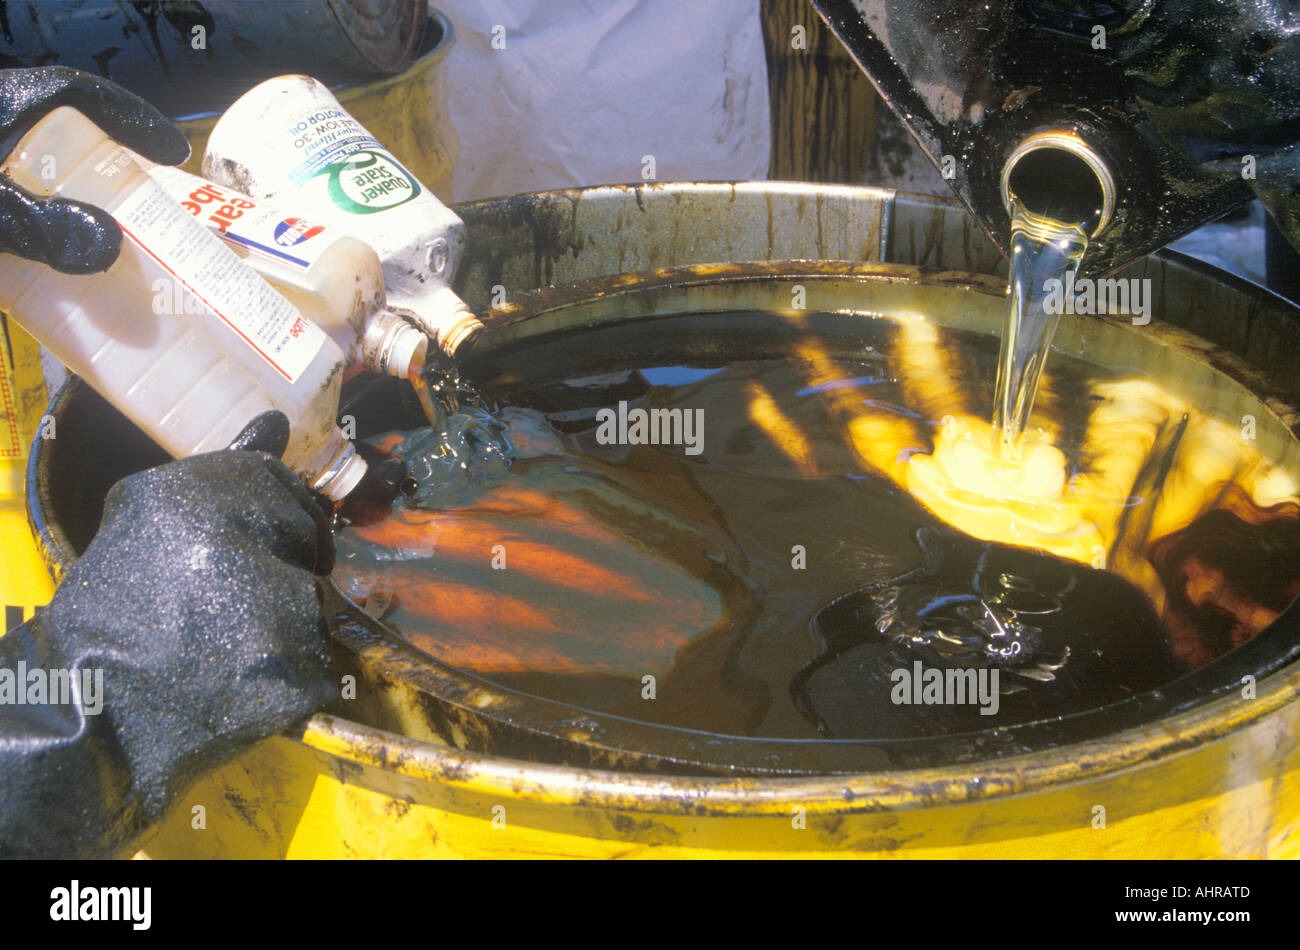 Workers pouring toxic wastes into a metal drum at waste cleanup site on Earth Day at the Unocal plant in Wilmington Los Angeles Stock Photo